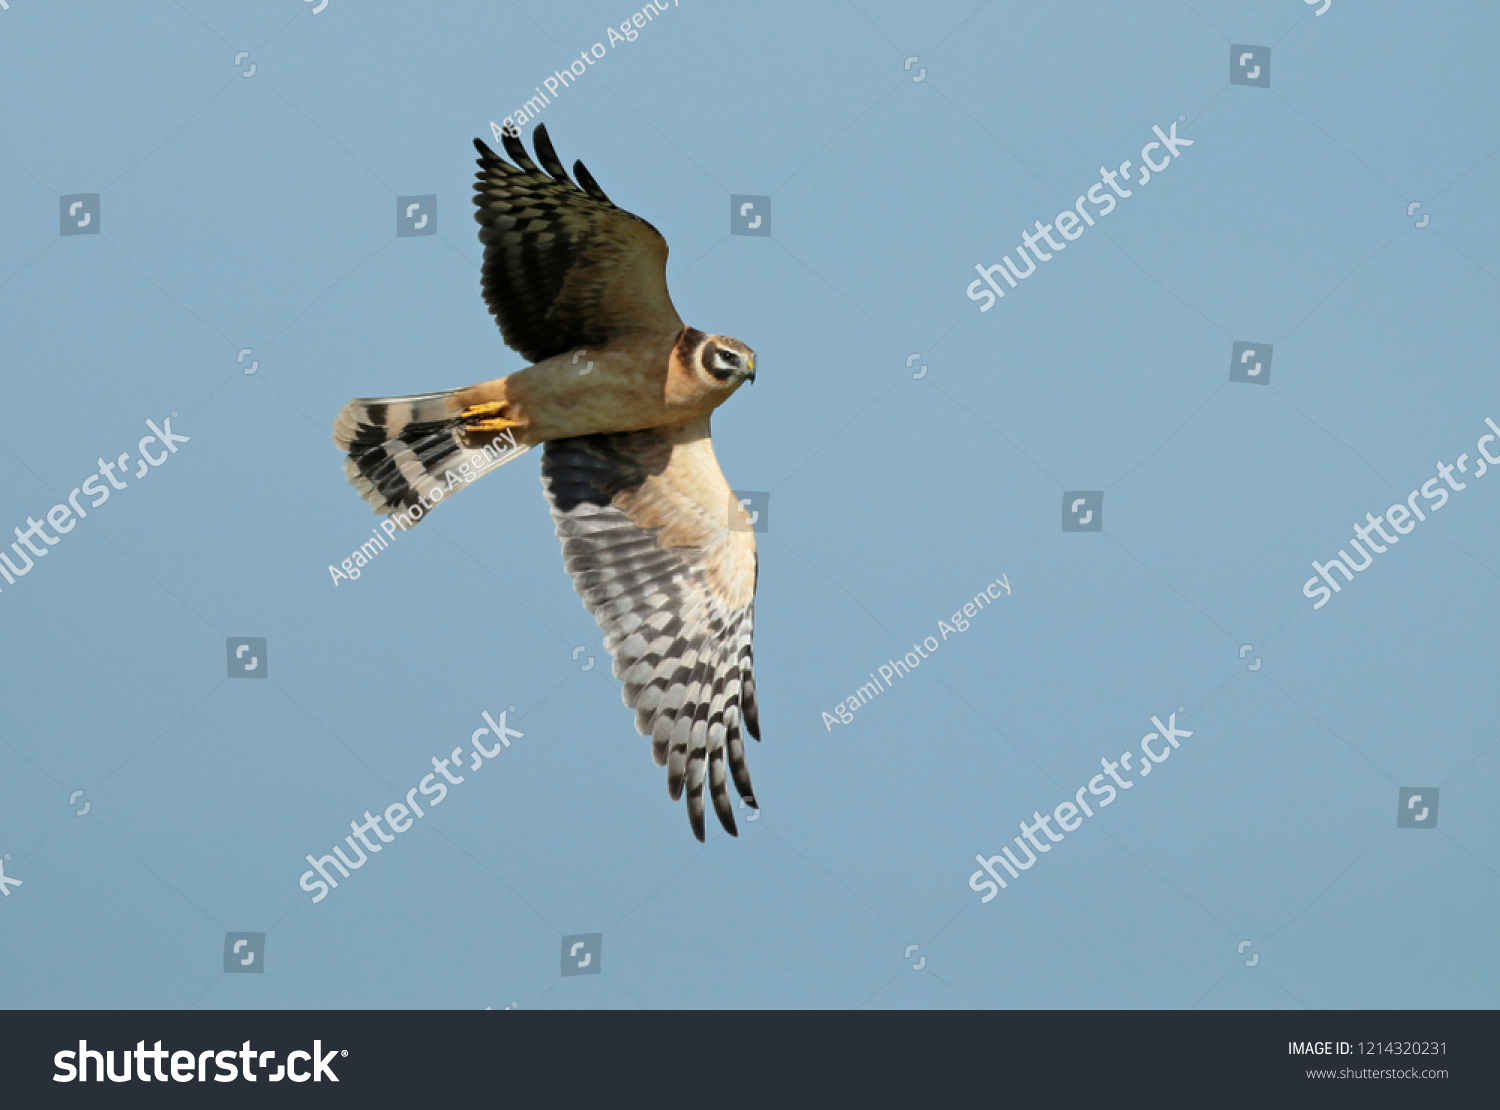 Pallid harrier (Circus macrourus), immature female in flight seen from the side showing under wing. #1214320231